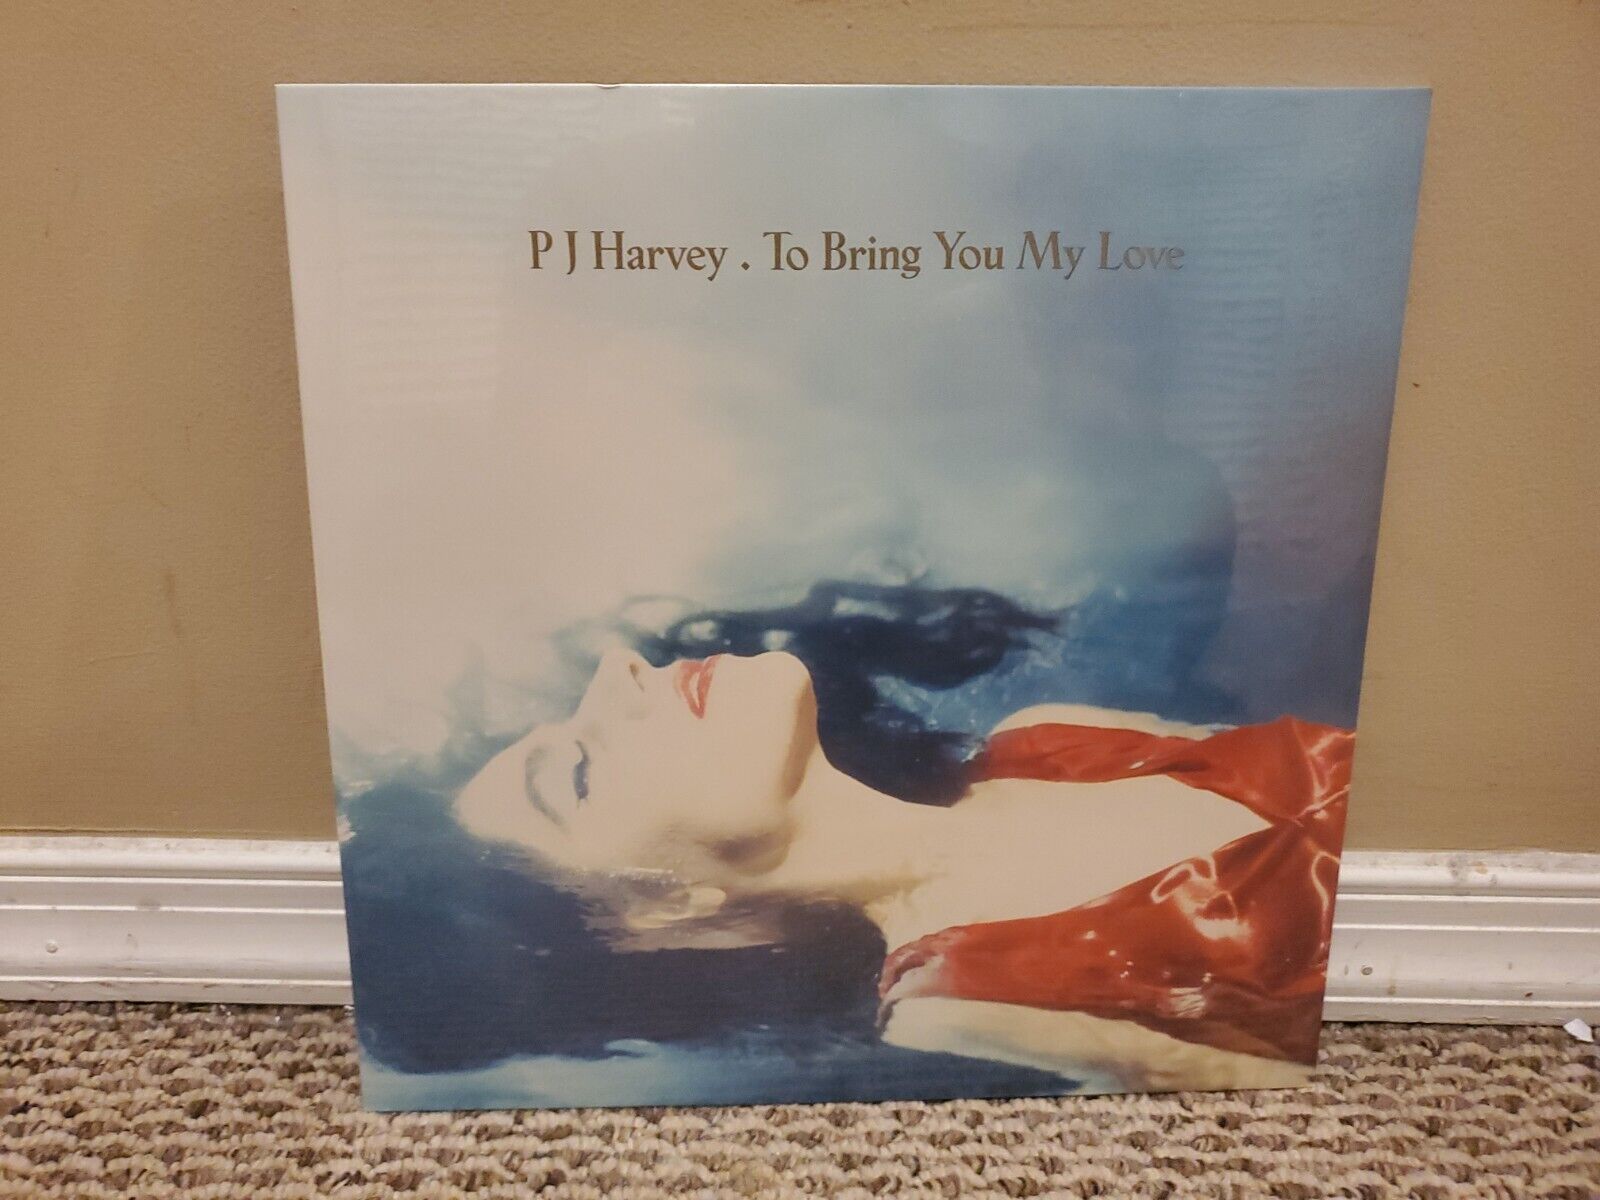 To Bring You My Love by PJ Harvey (Record, 2020) New Sealed